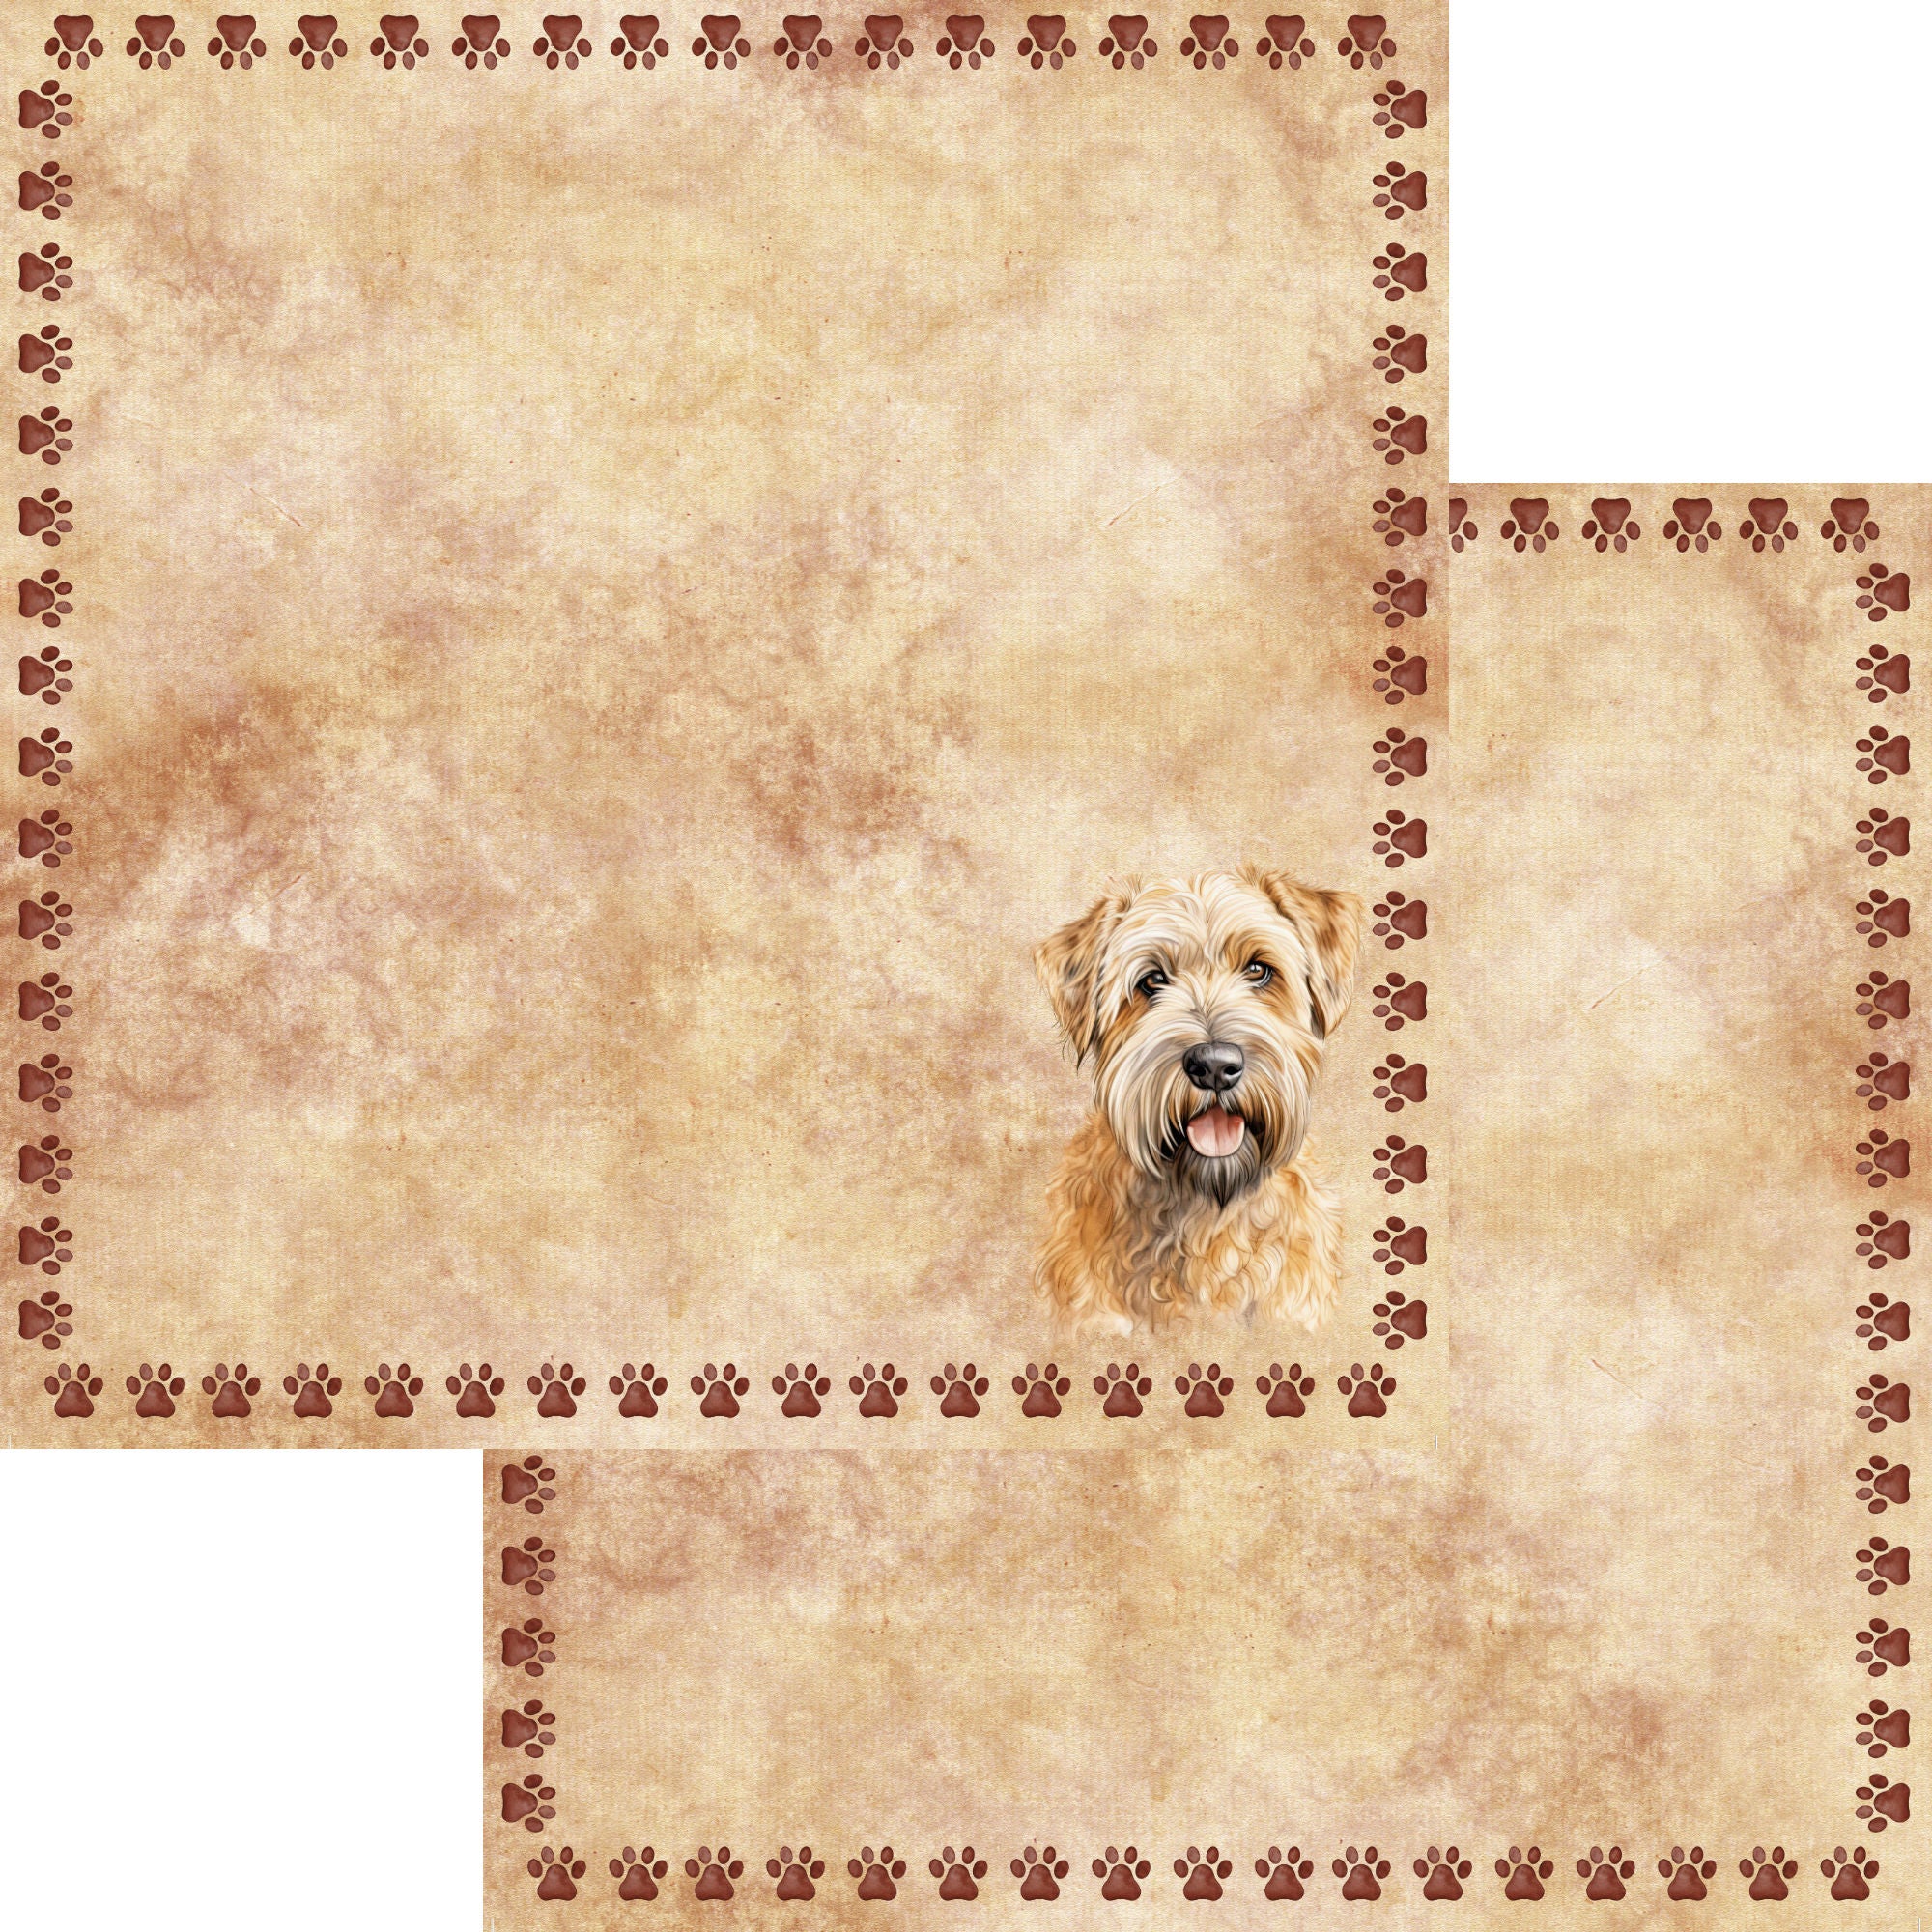 Dog Breeds Collection Wheaten Terrier 12 x 12 Double-Sided Scrapbook Paper by SSC Designs